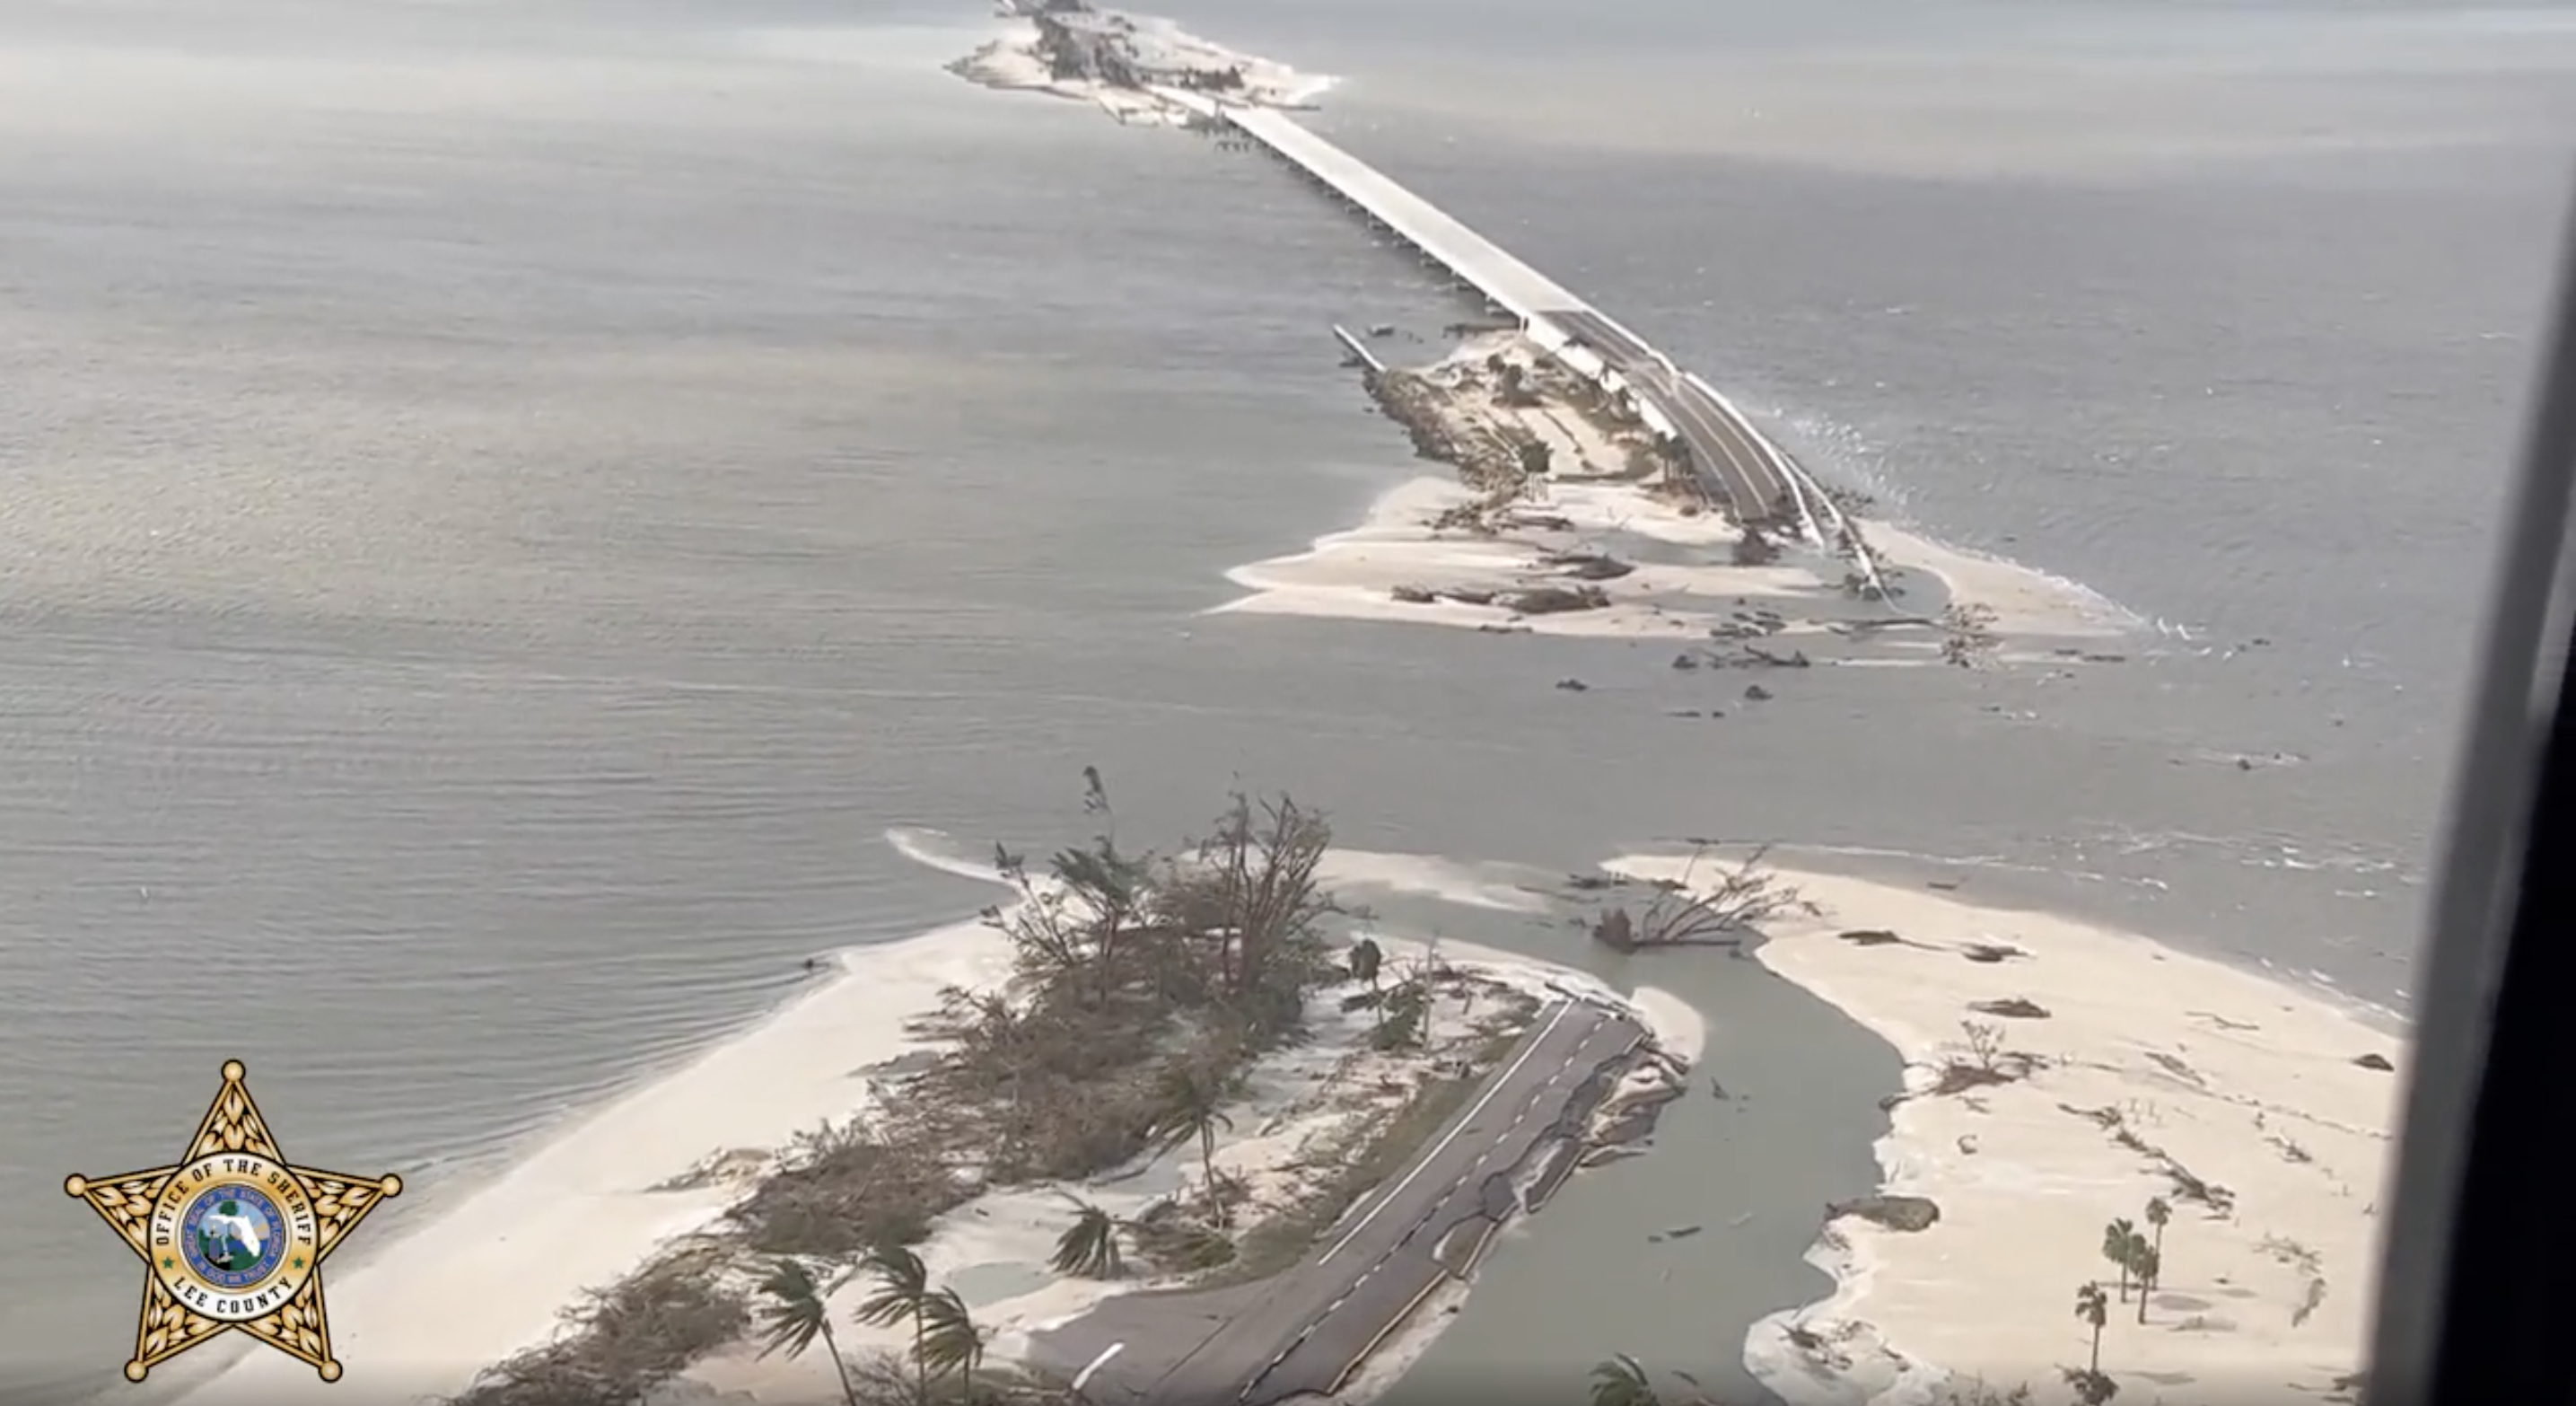 WATCH: Lee County sheriff's video from air shows devastated areas from Hurricane  Ian